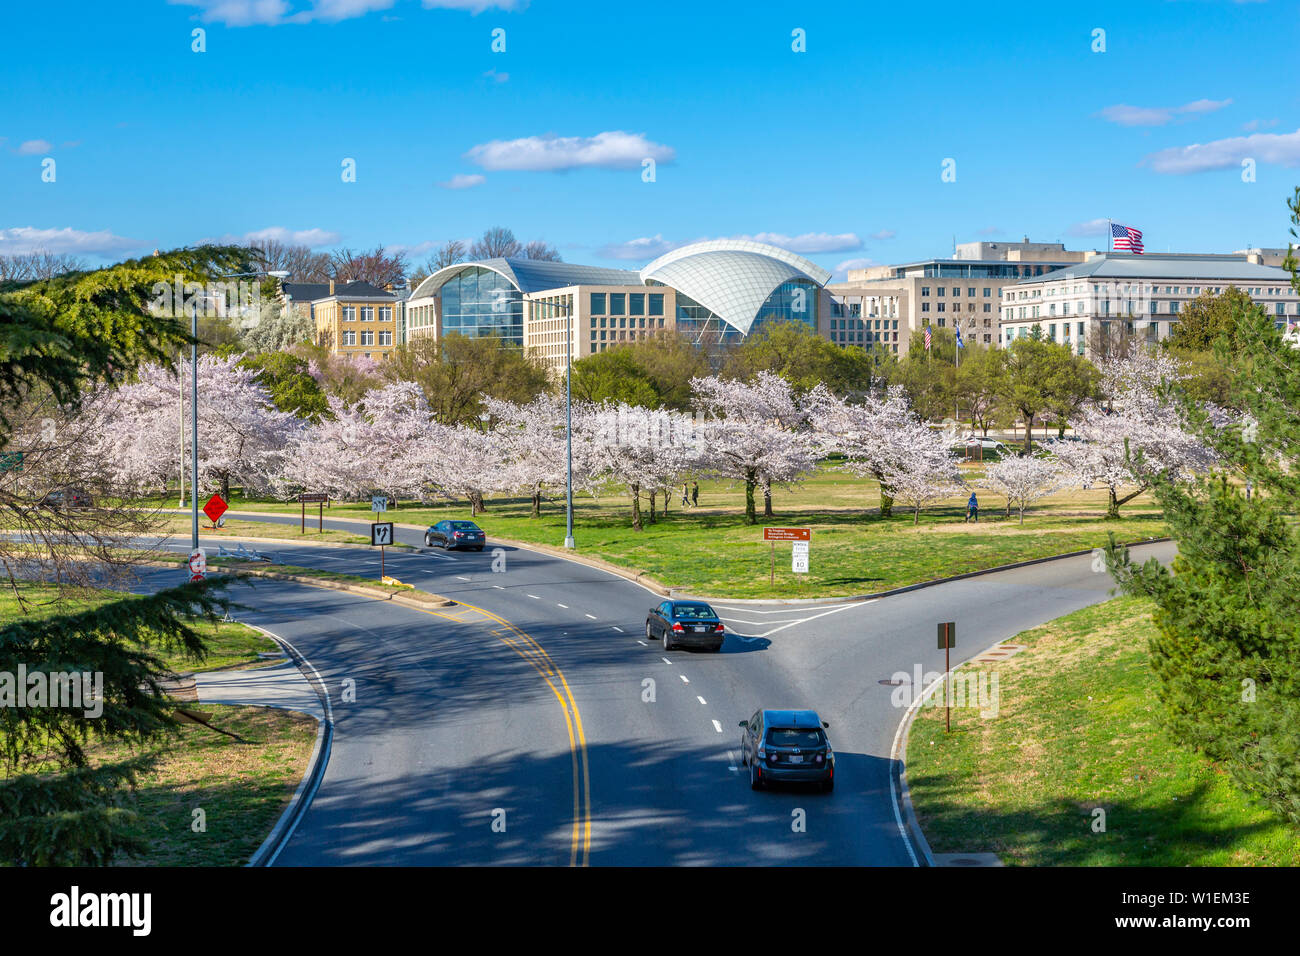 View of United States Institute of Peace, Washington D.C., United States of America, North America Stock Photo